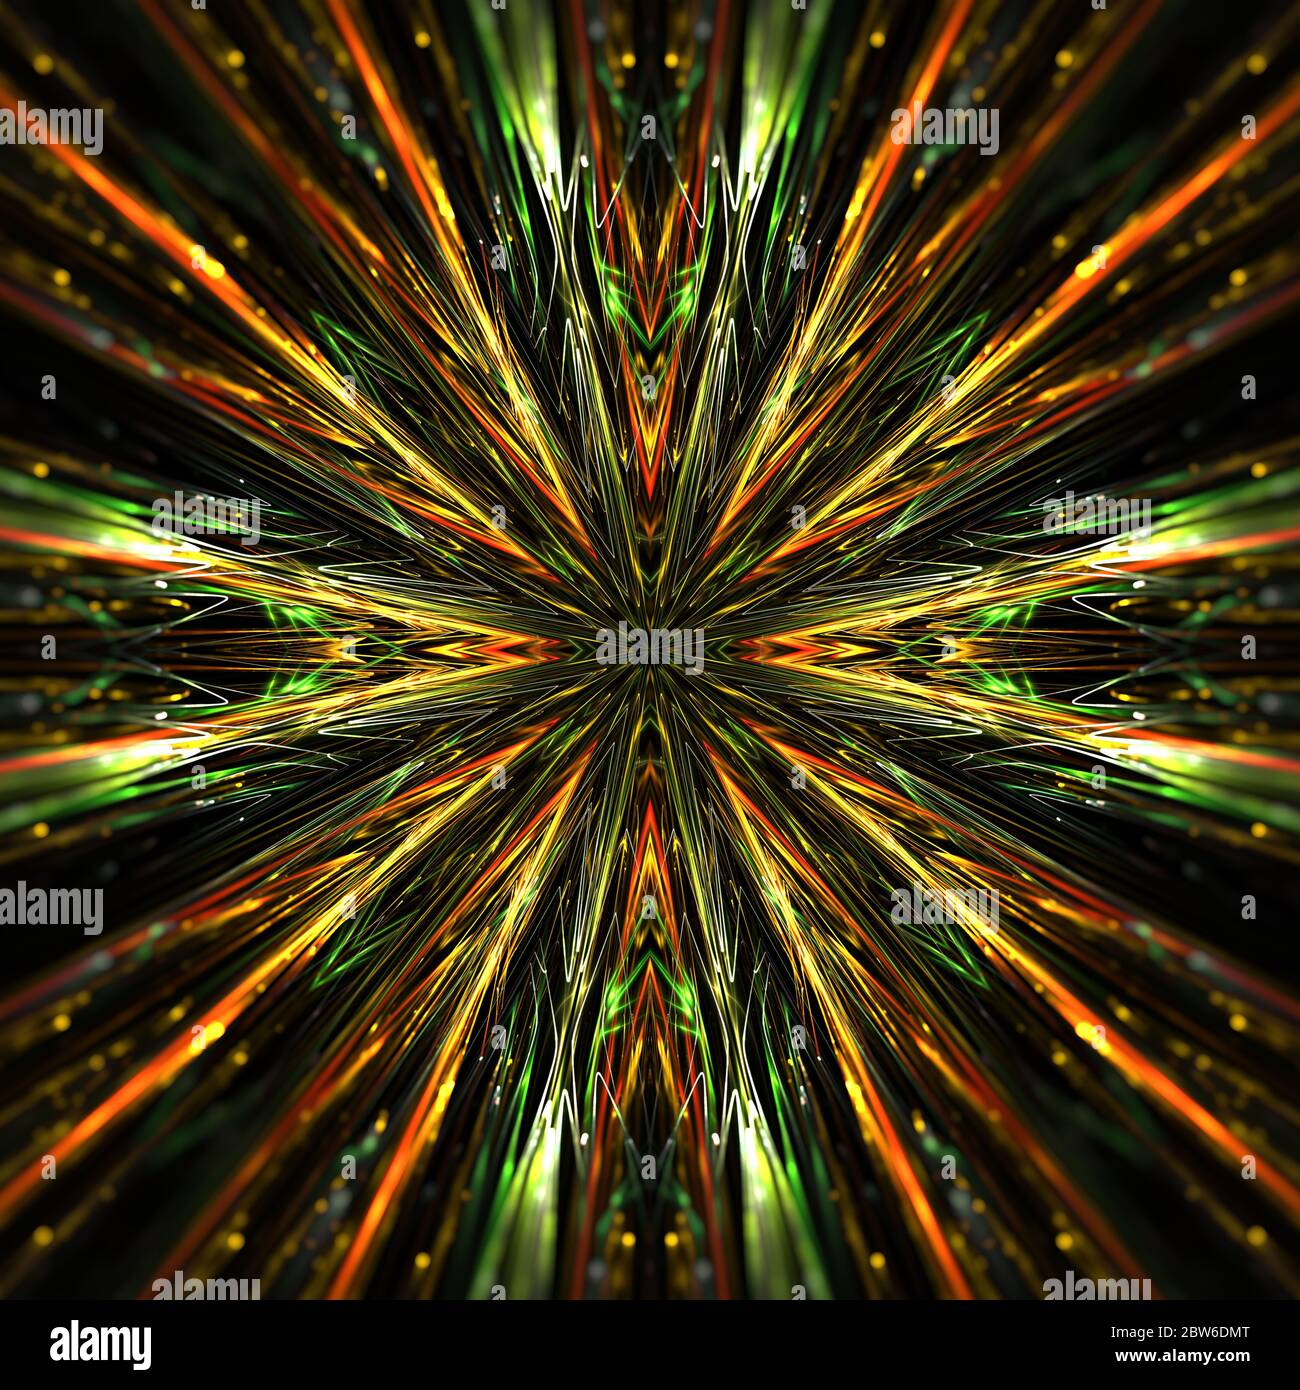 Symmetrical explosion of futuristic tribal patterns, green, yellow and orange colored Stock Photo